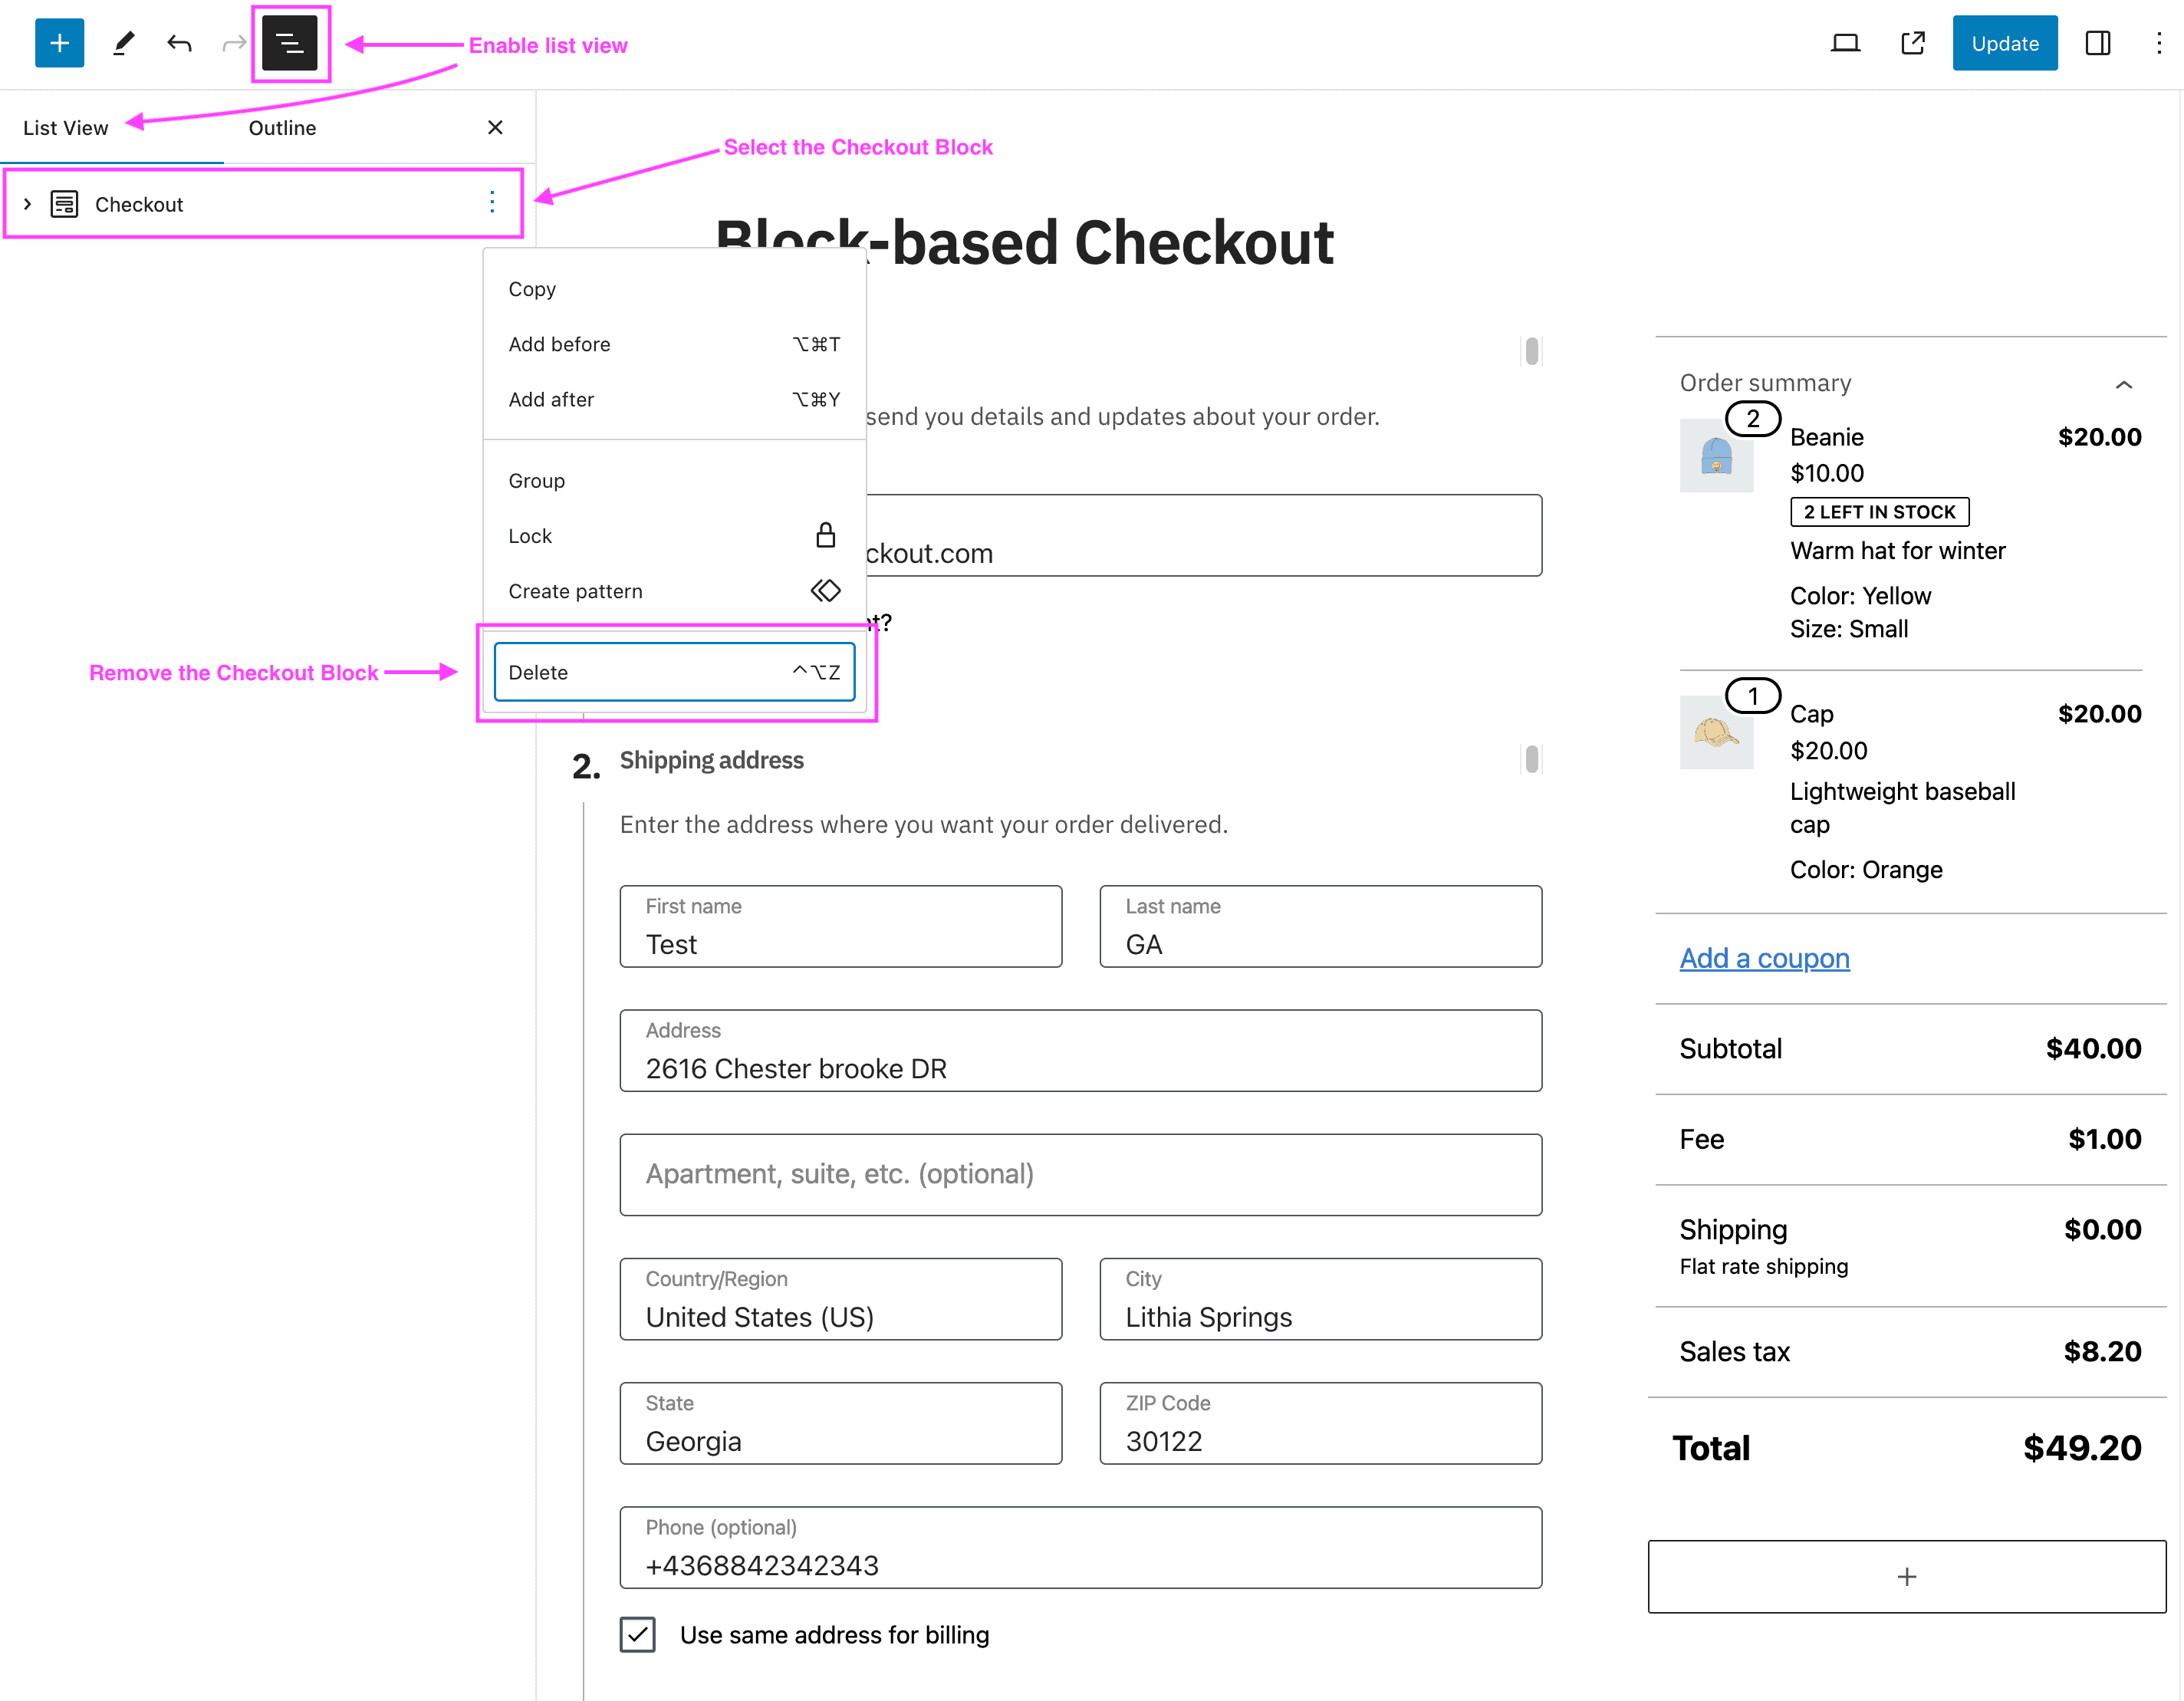 Screenshot of the checkout edit page screen, showing the steps to delete the block-based checkout form.